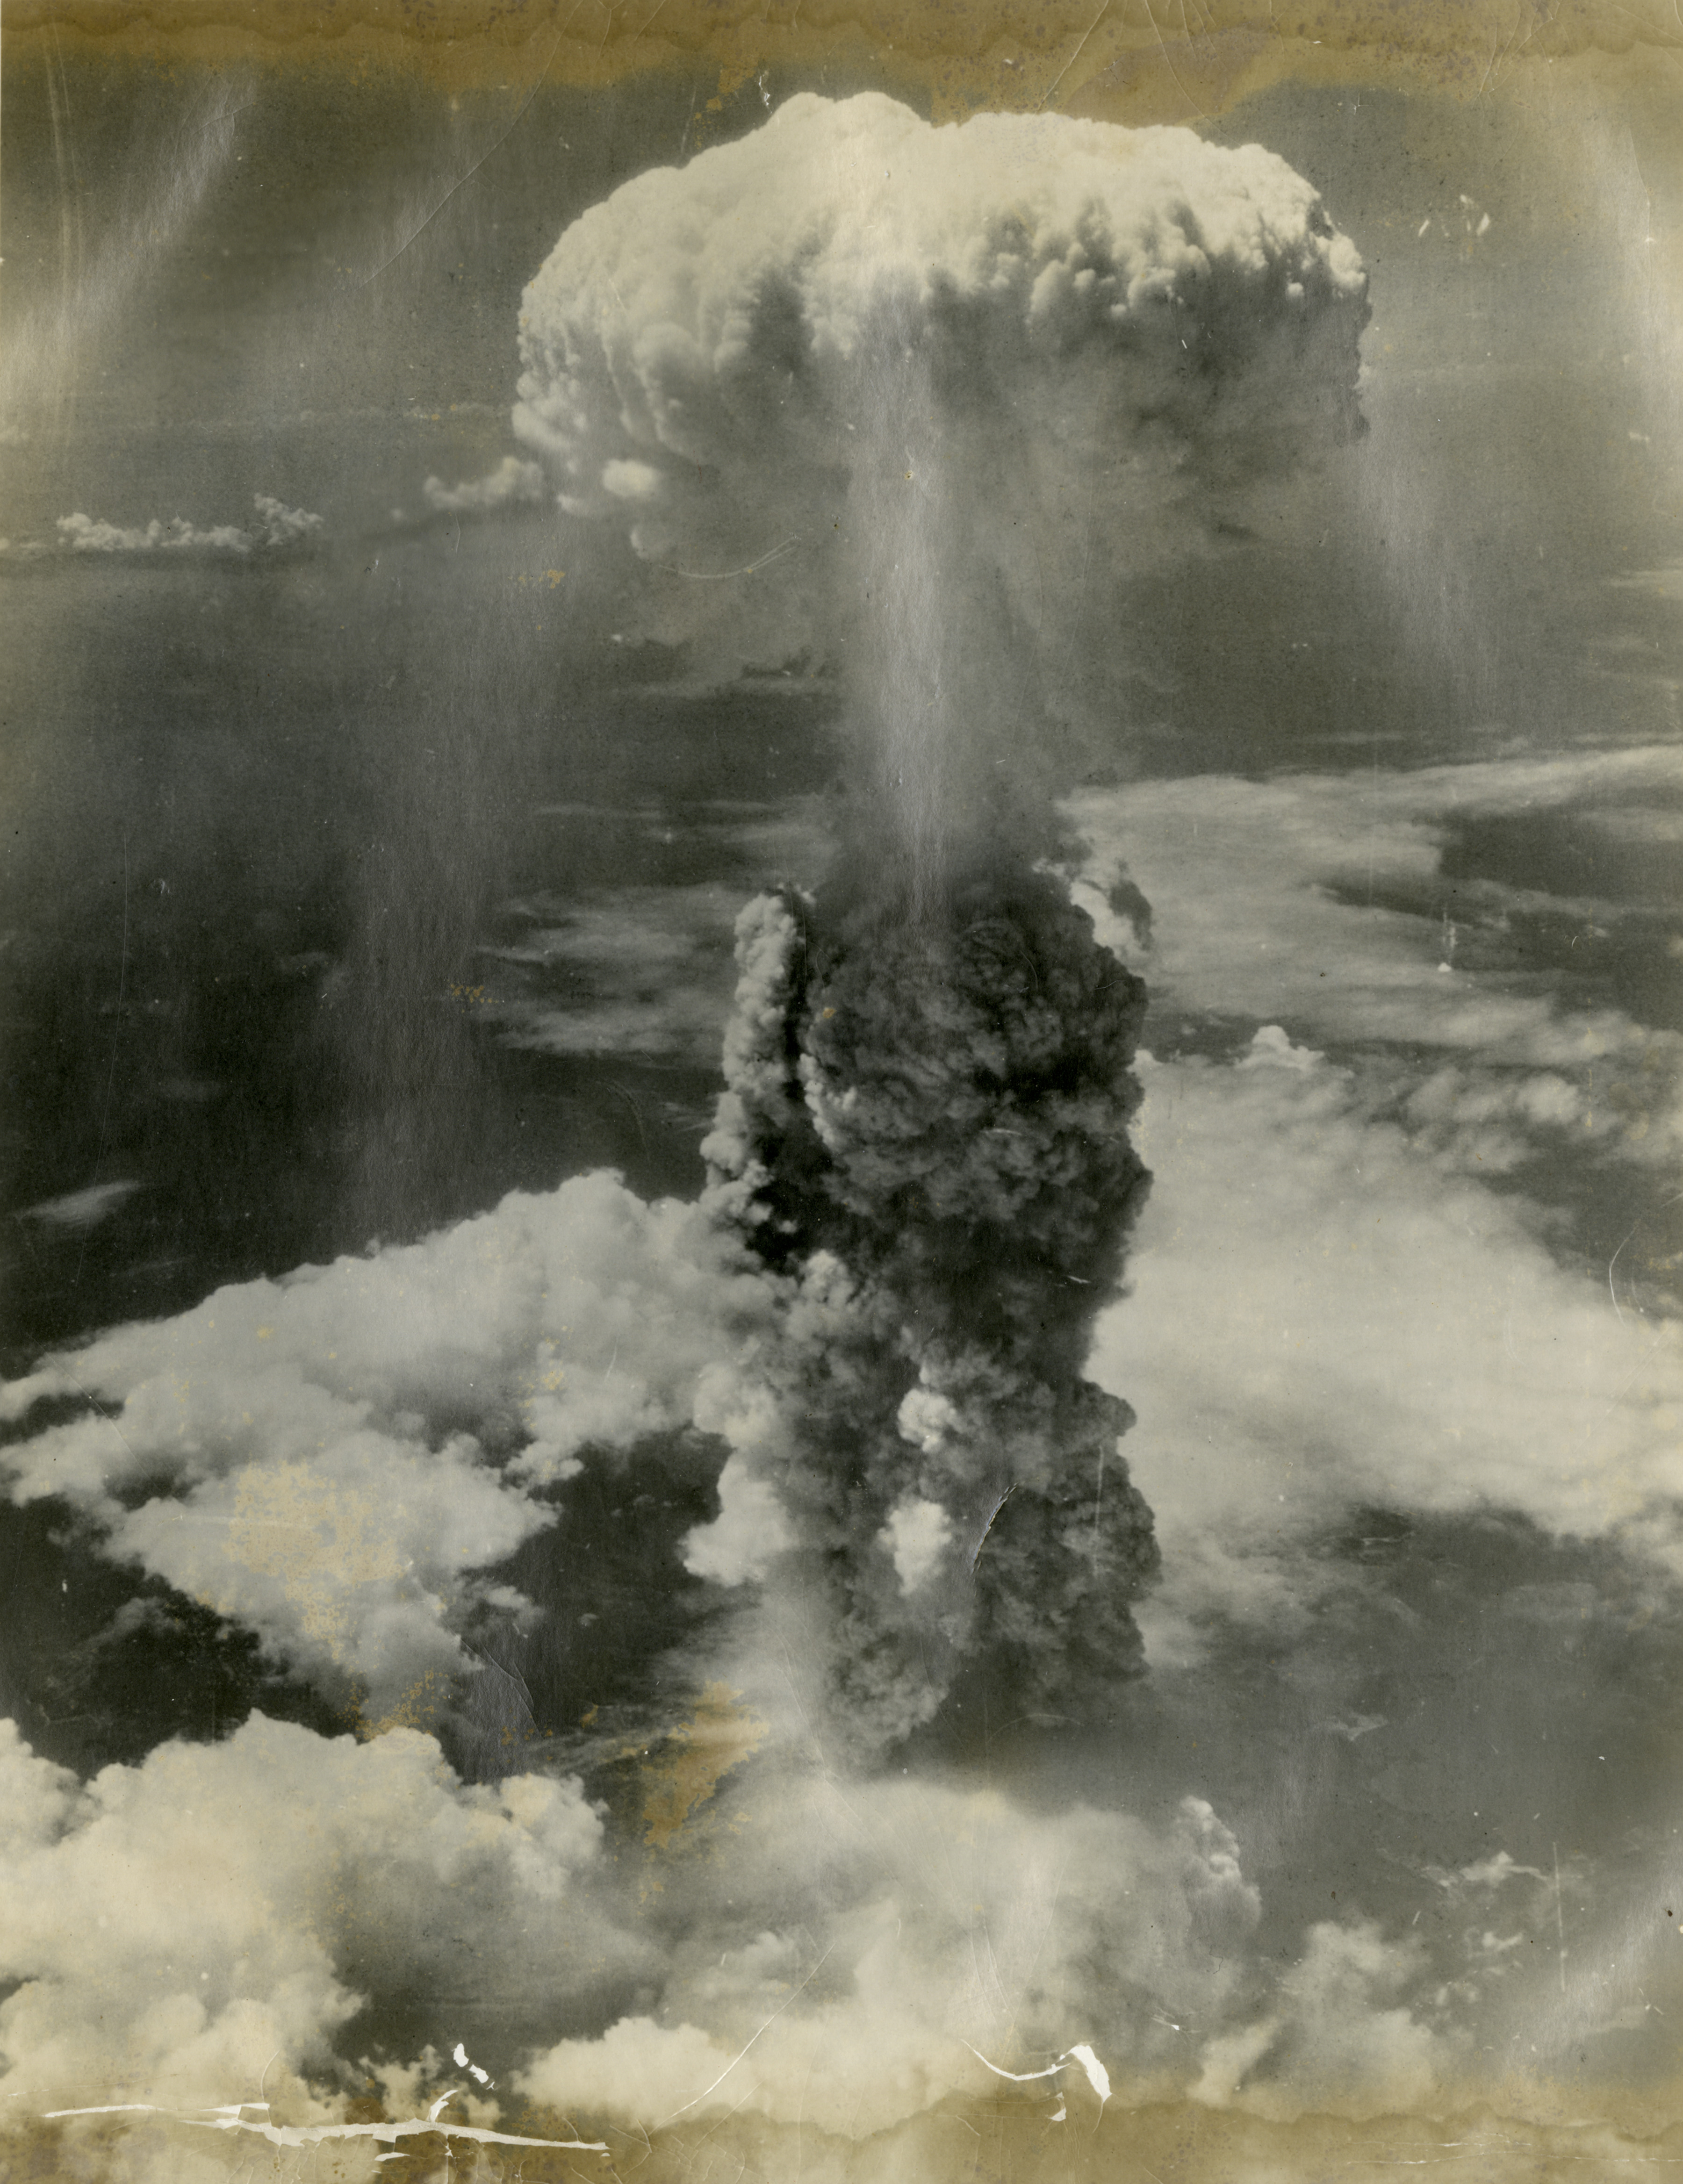 Mushroom Cloud From Atomic Bomb Over Nagasaki Japan 9 August 1945 The Digital Collections Of The National Wwii Museum Oral Histories